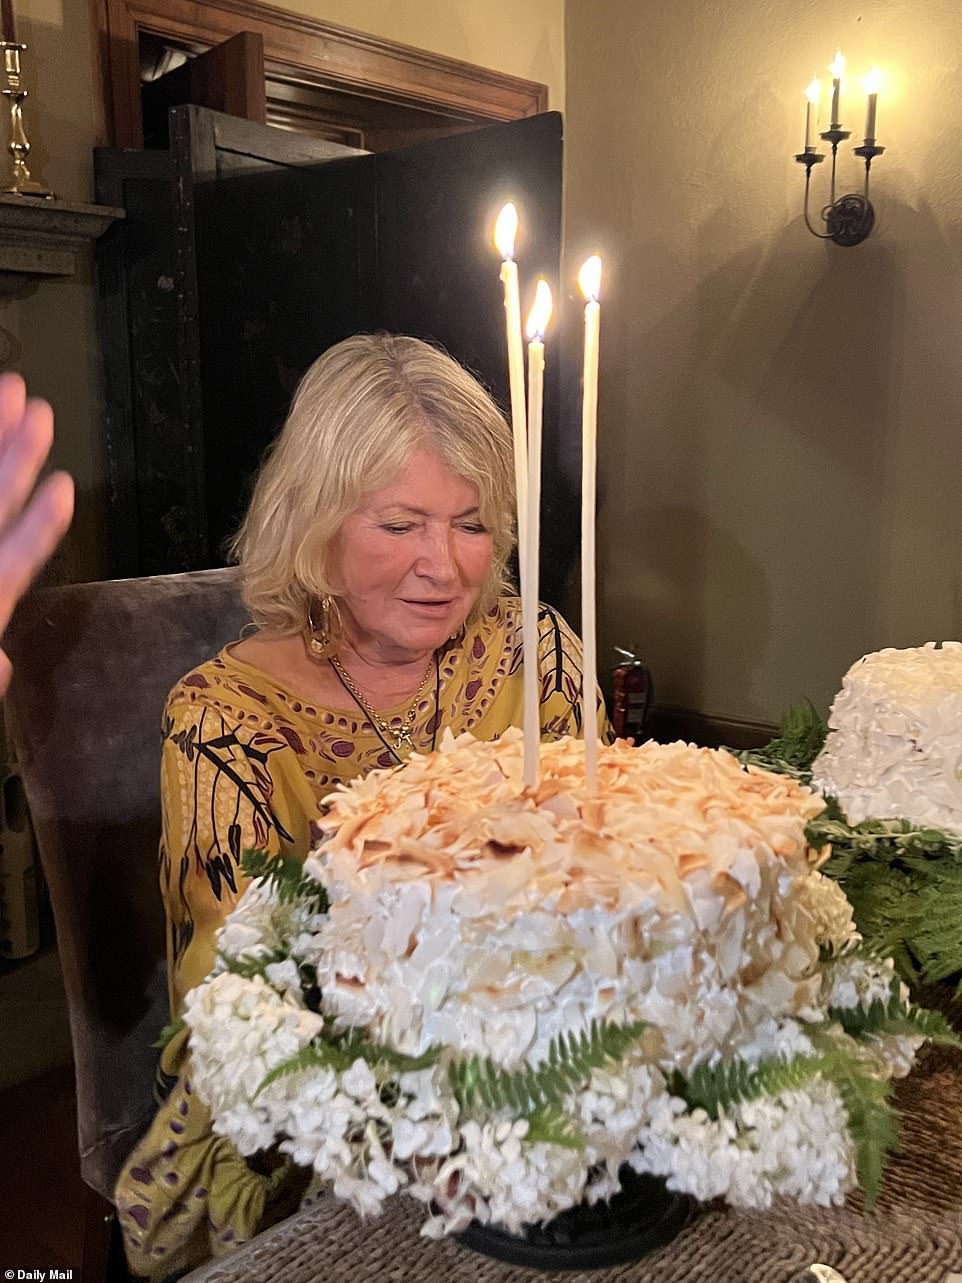 So delicious: her delicious cake appeared on three white candles